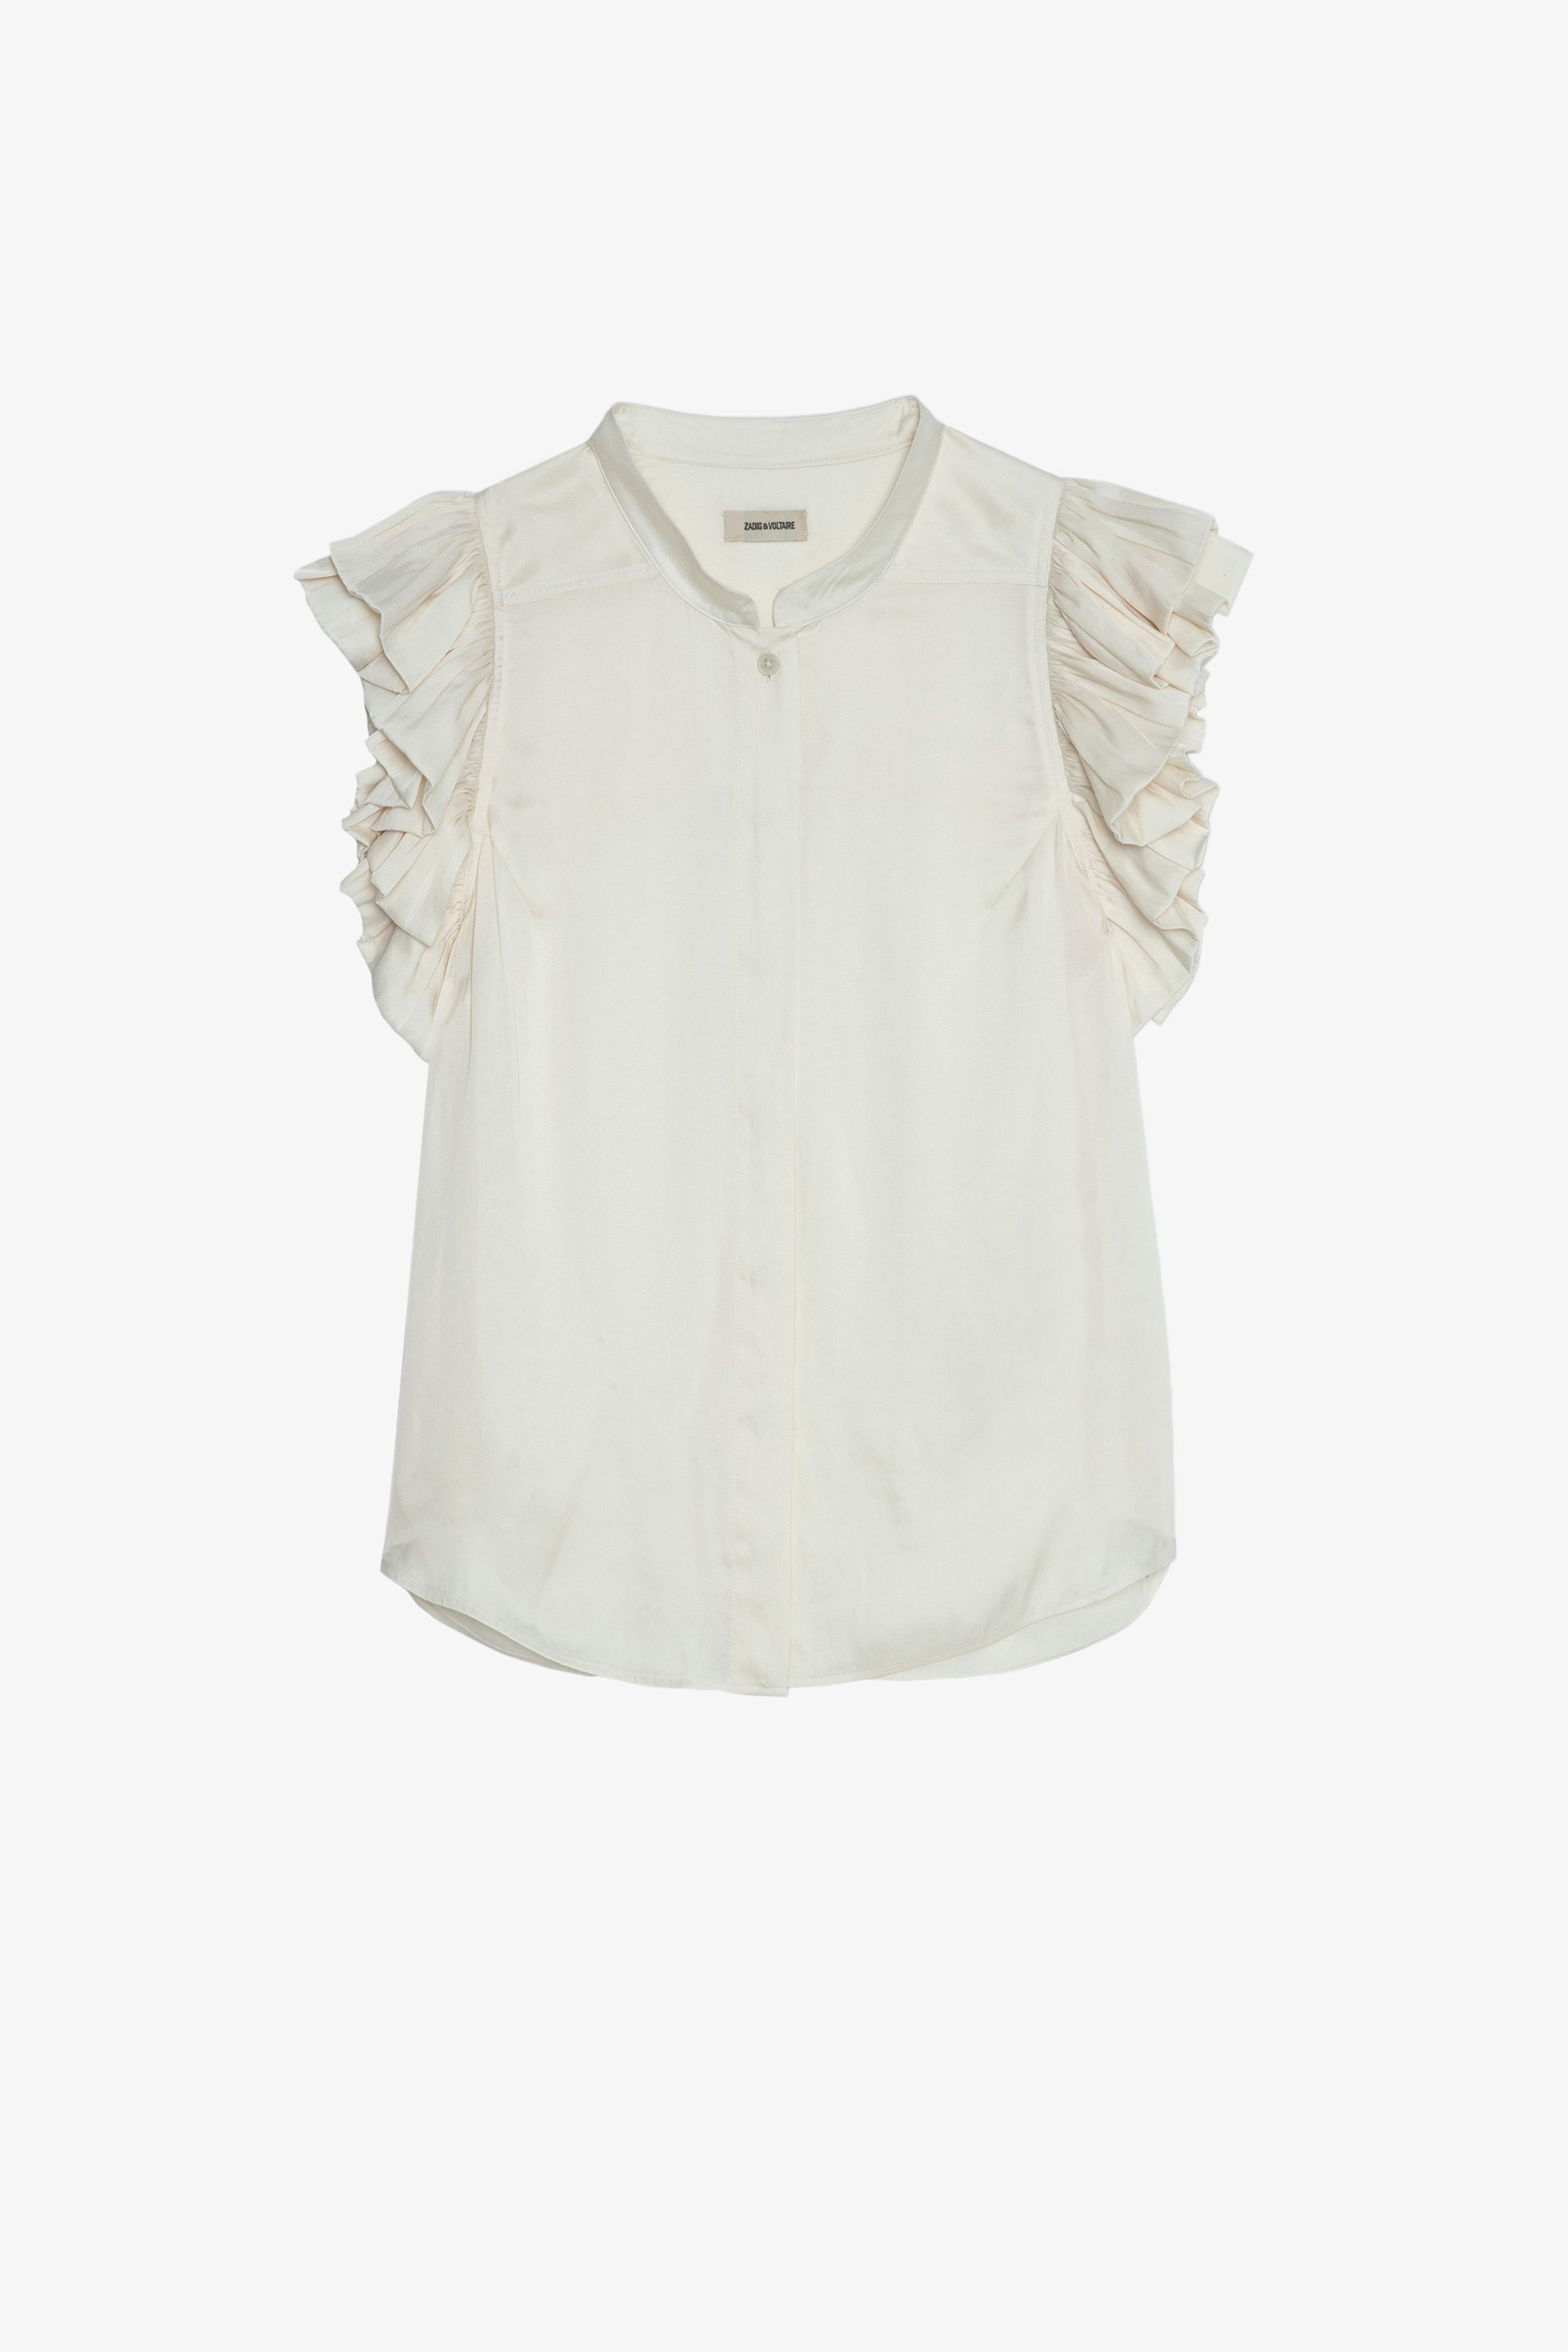 Tiza Satin Top - Women's Craie satin top with short ruffled sleeves and button front.